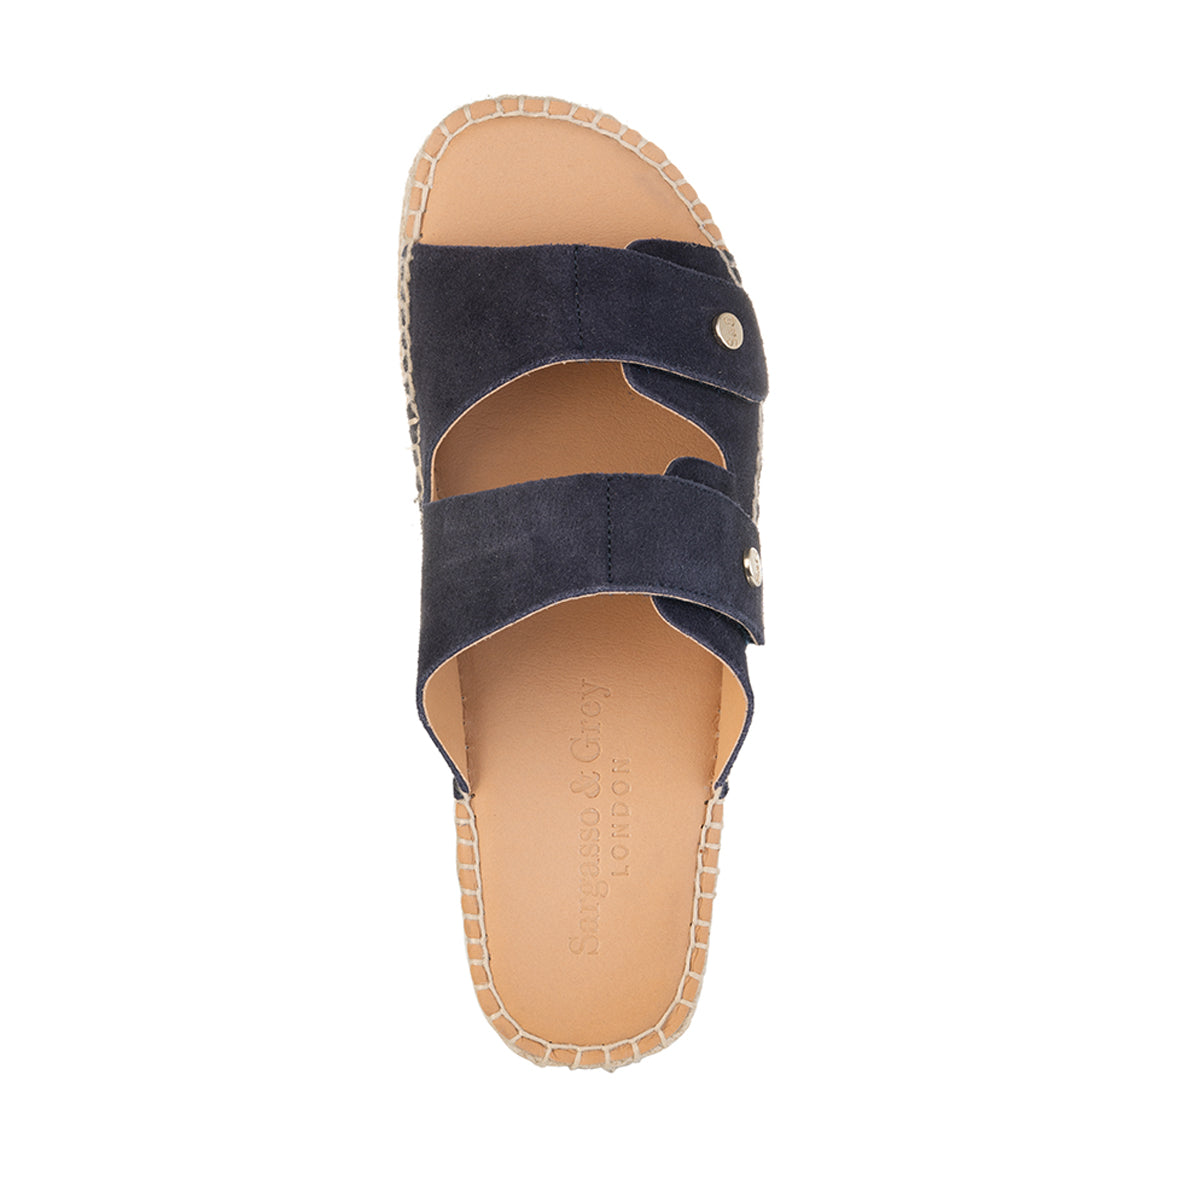 Candy - Wide Width Espadrille - Navy Suede – Sargasso and Grey